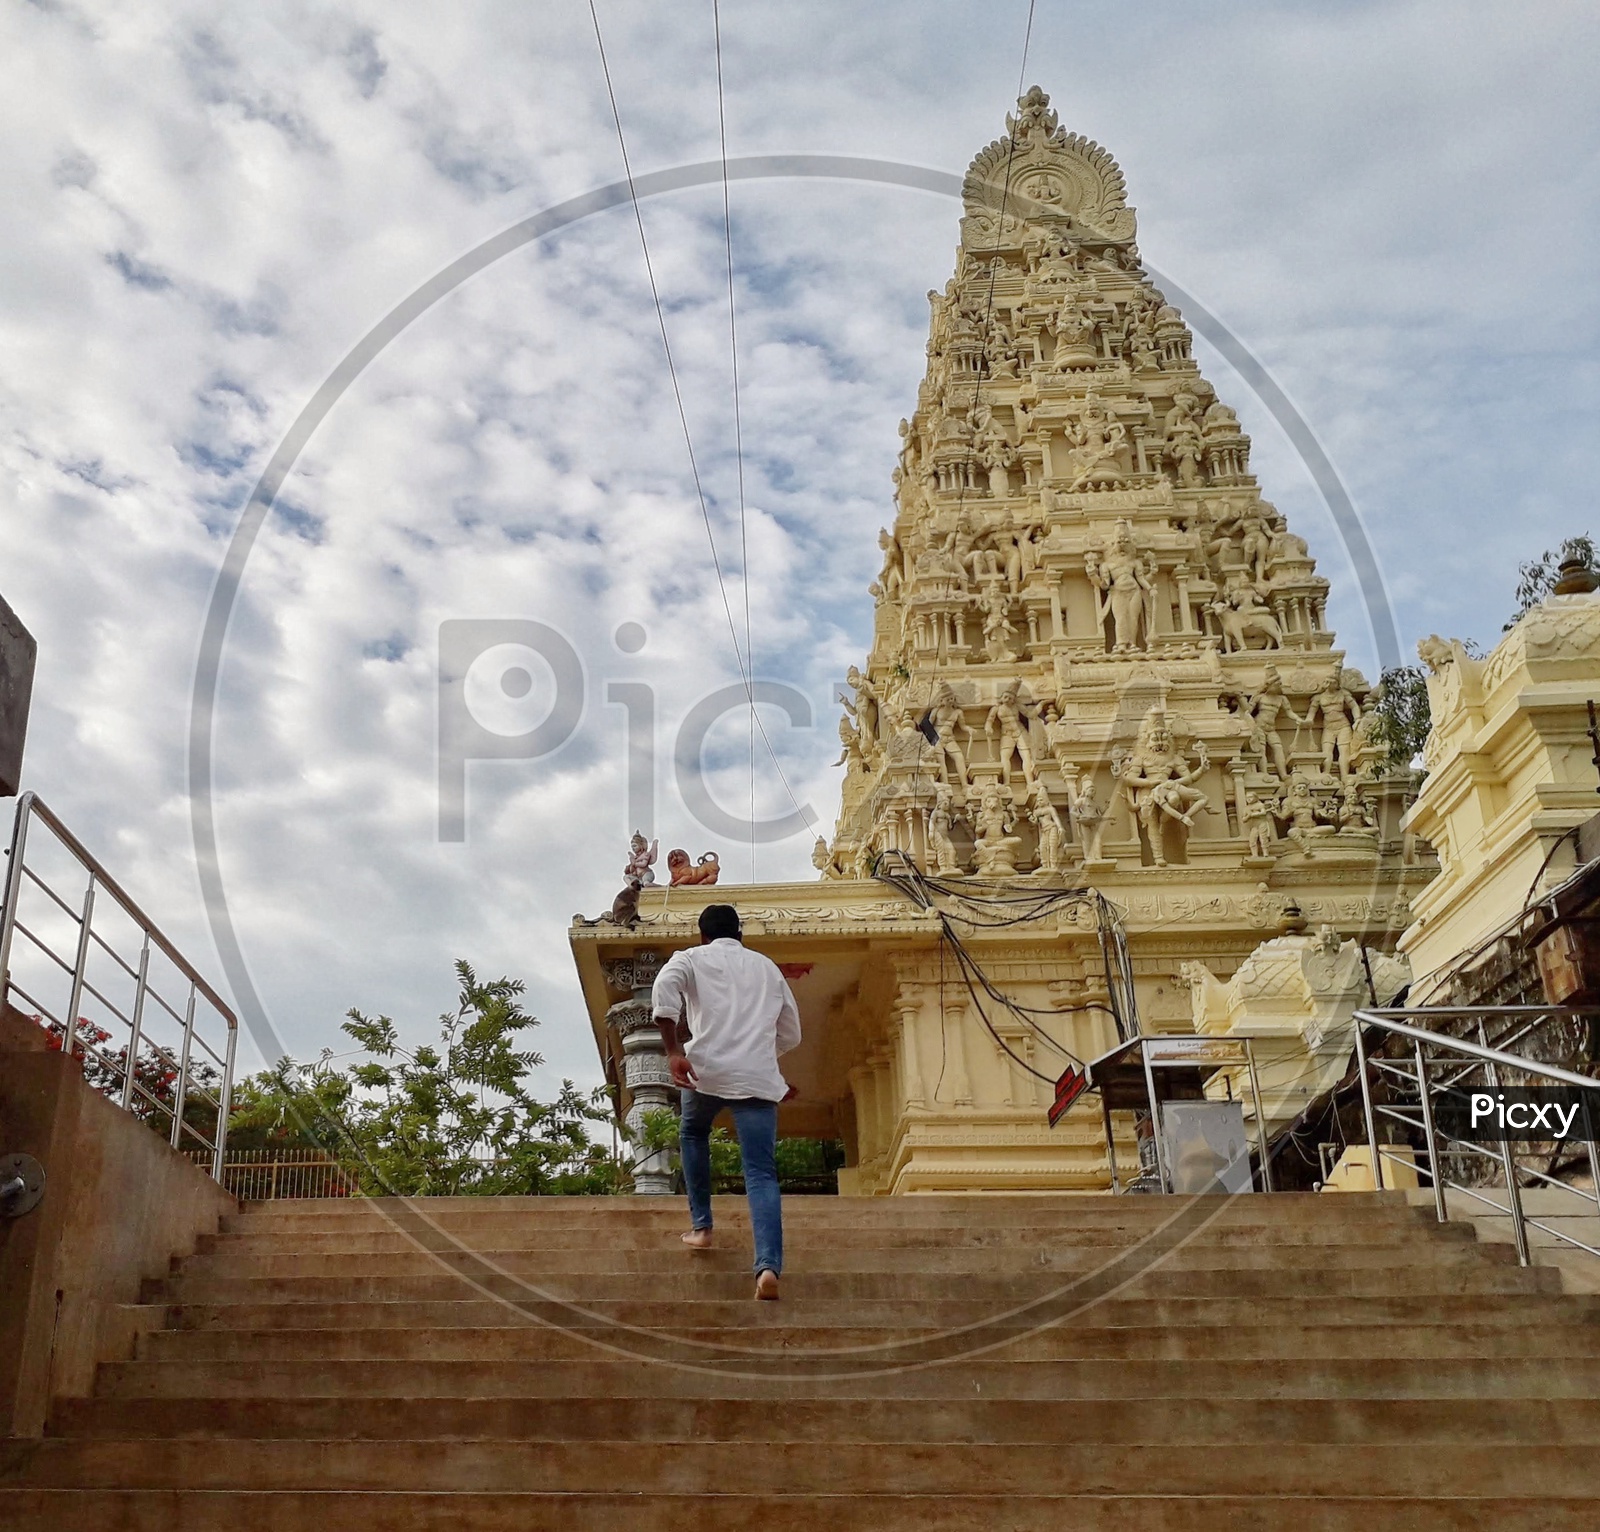 Climbing the steps to reach the temple